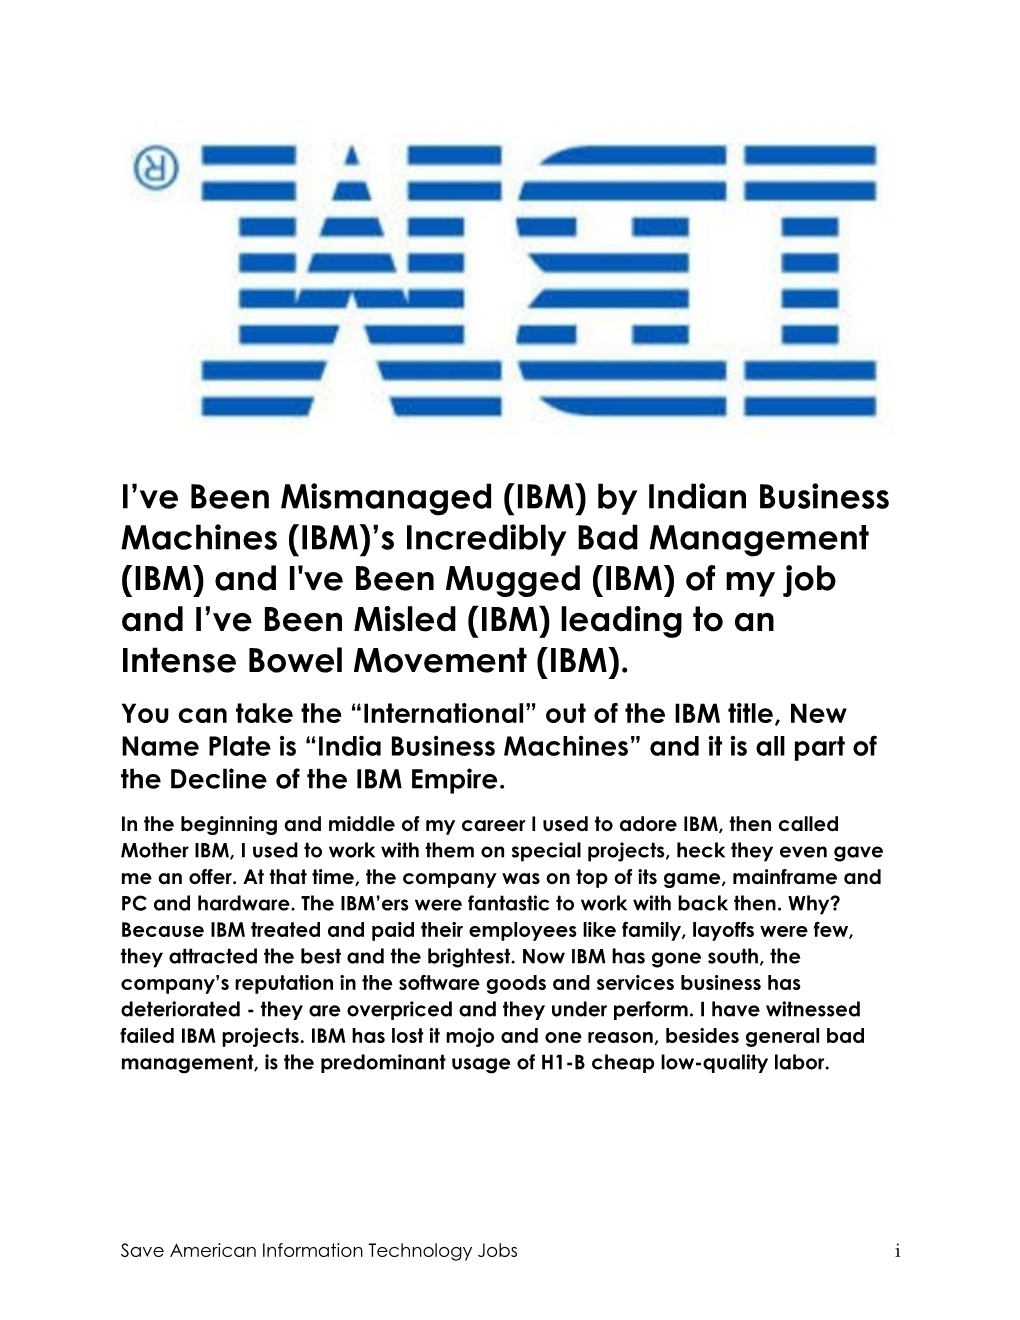 I've Been Mismanaged (IBM) by Indian Business Machines (IBM)